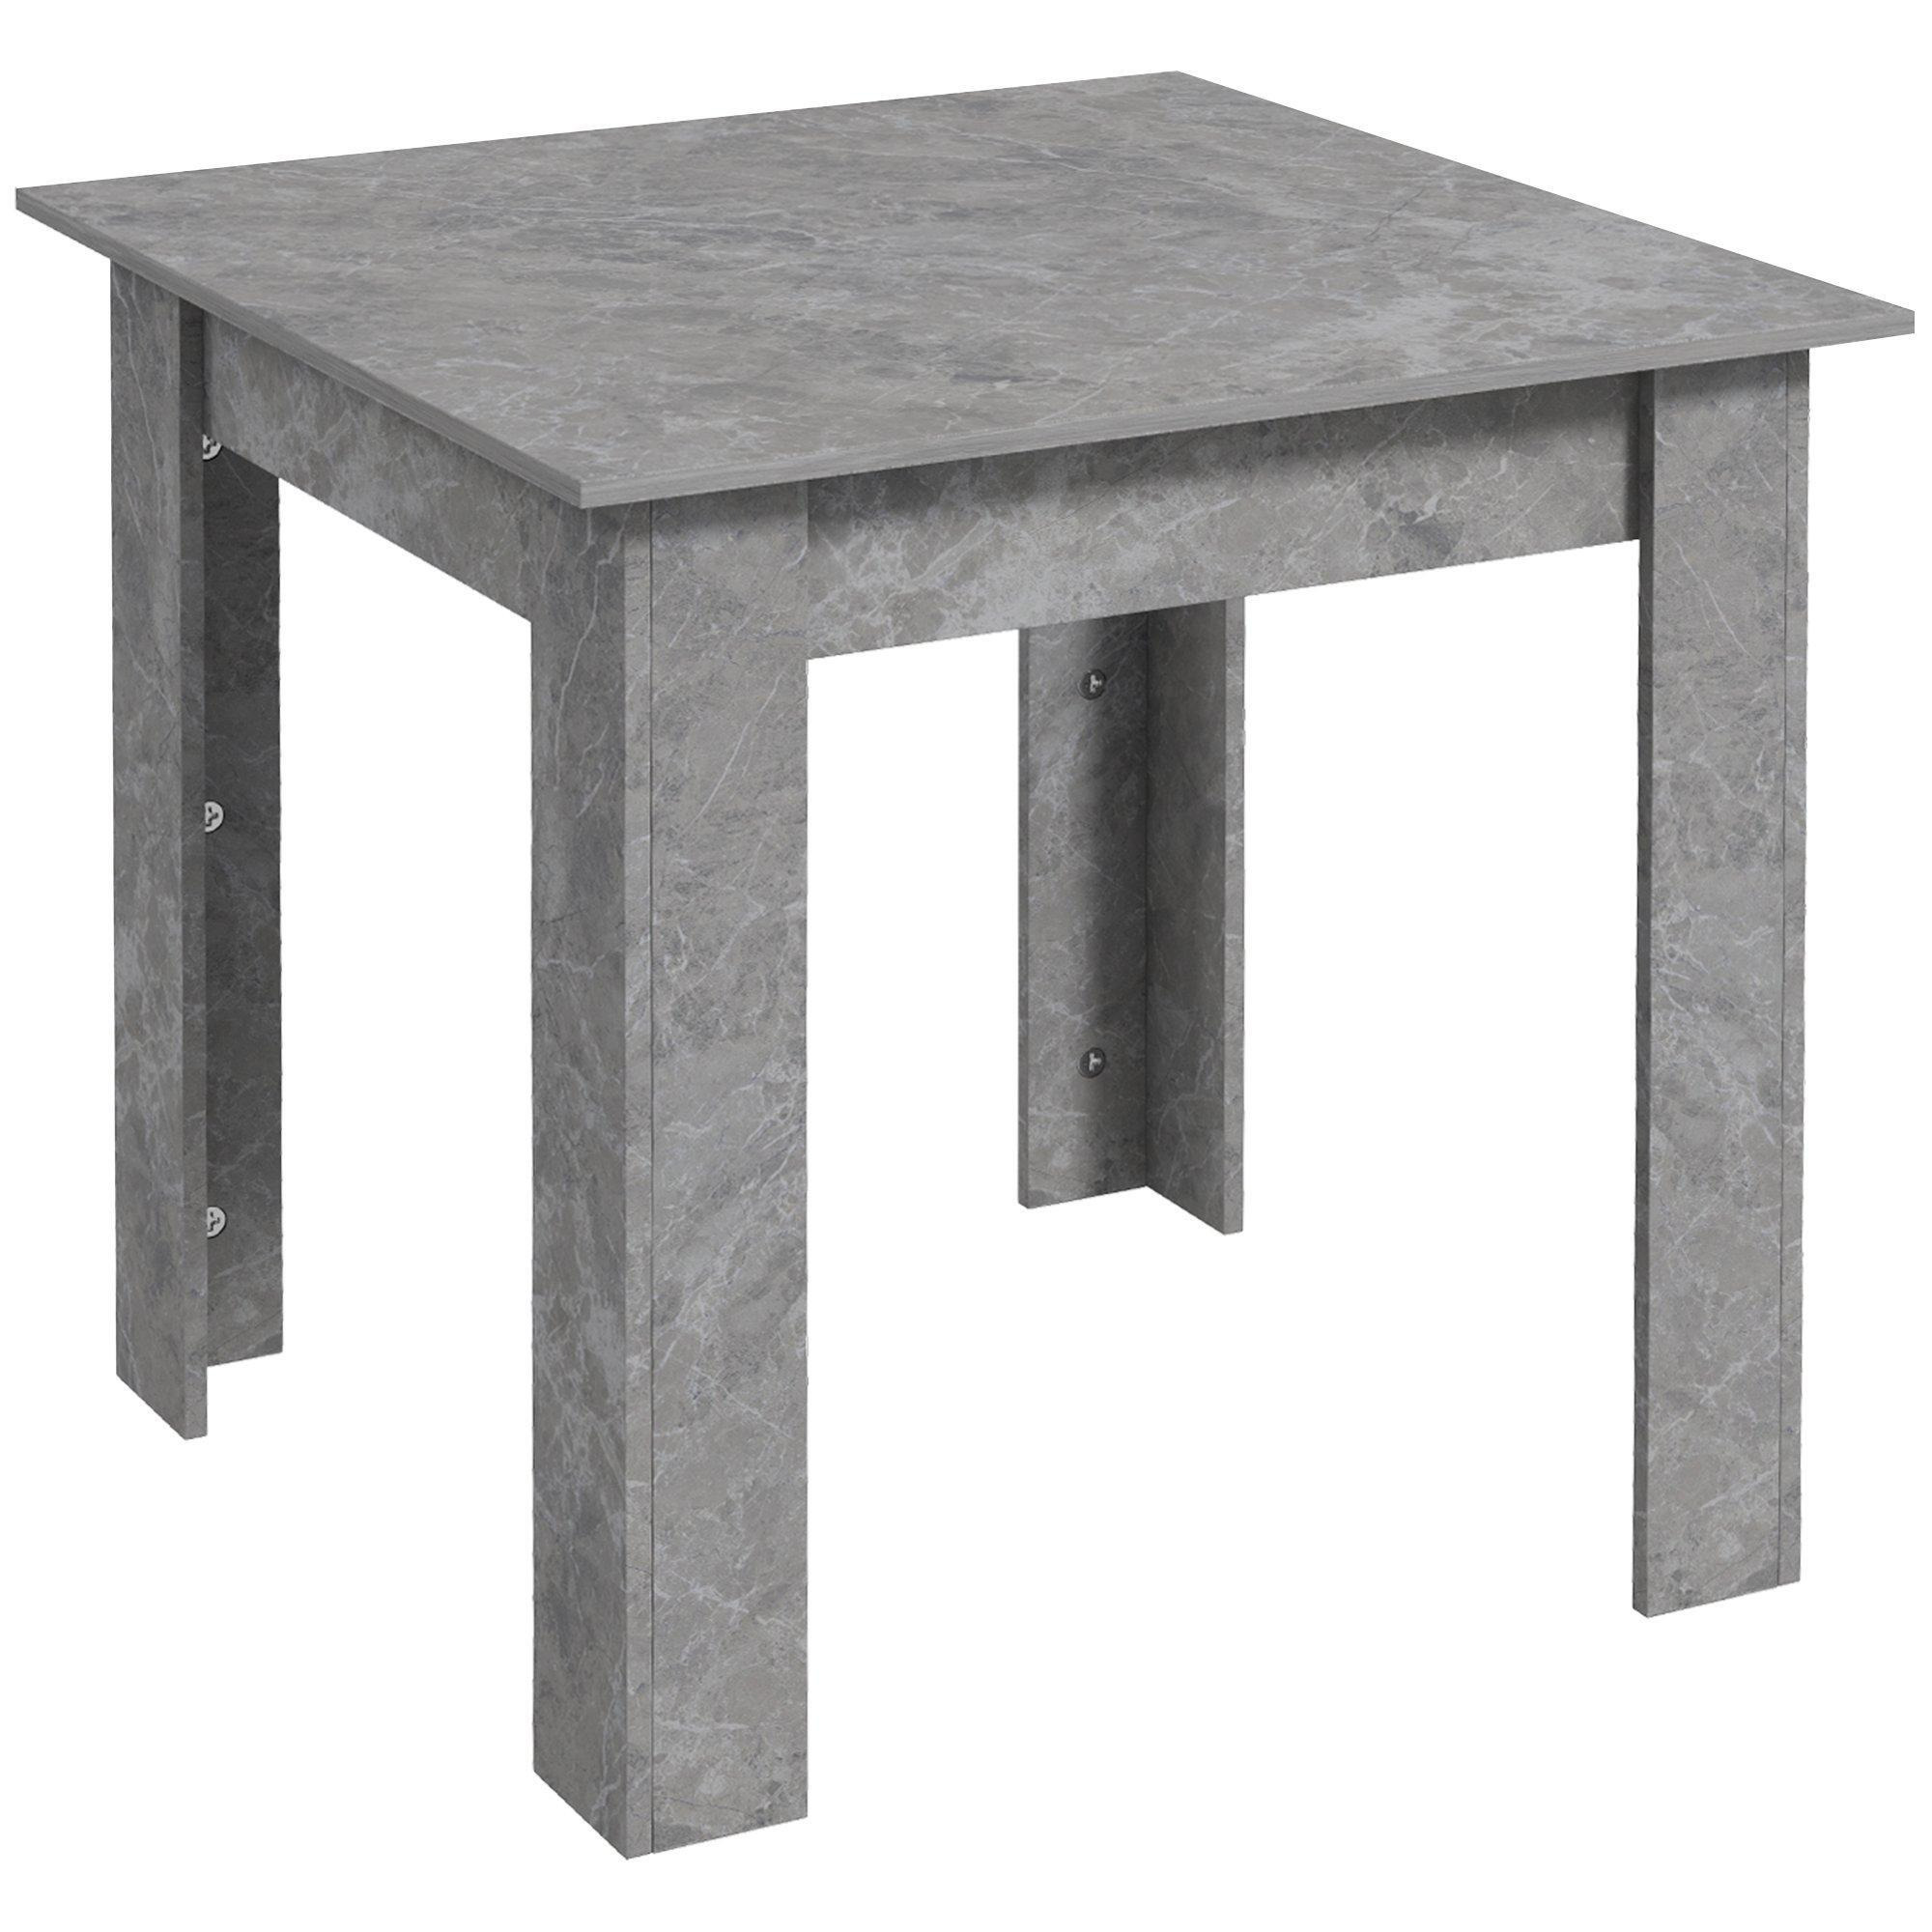 Dining Table for 2 Modern Kitchen Table with Faux Concrete Effect - image 1